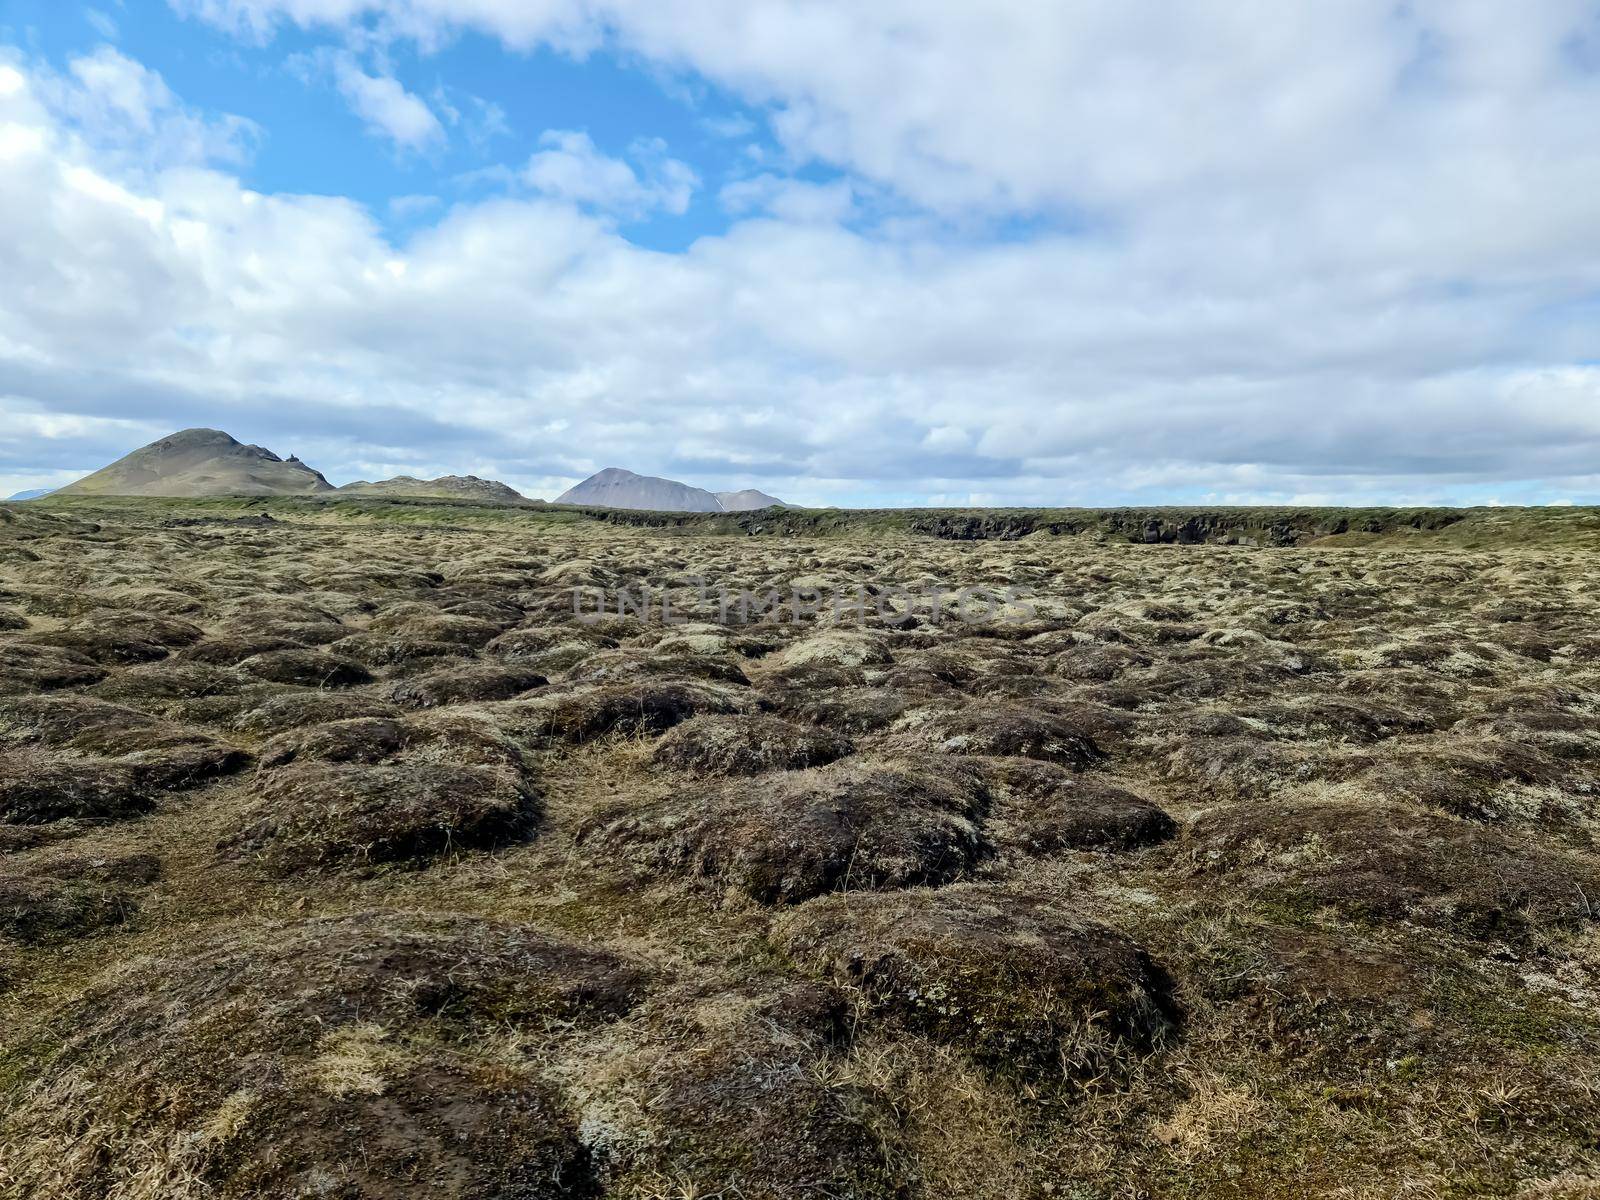 View of a dry landscape on Iceland - Myvatn with rocks and mountains. by MP_foto71